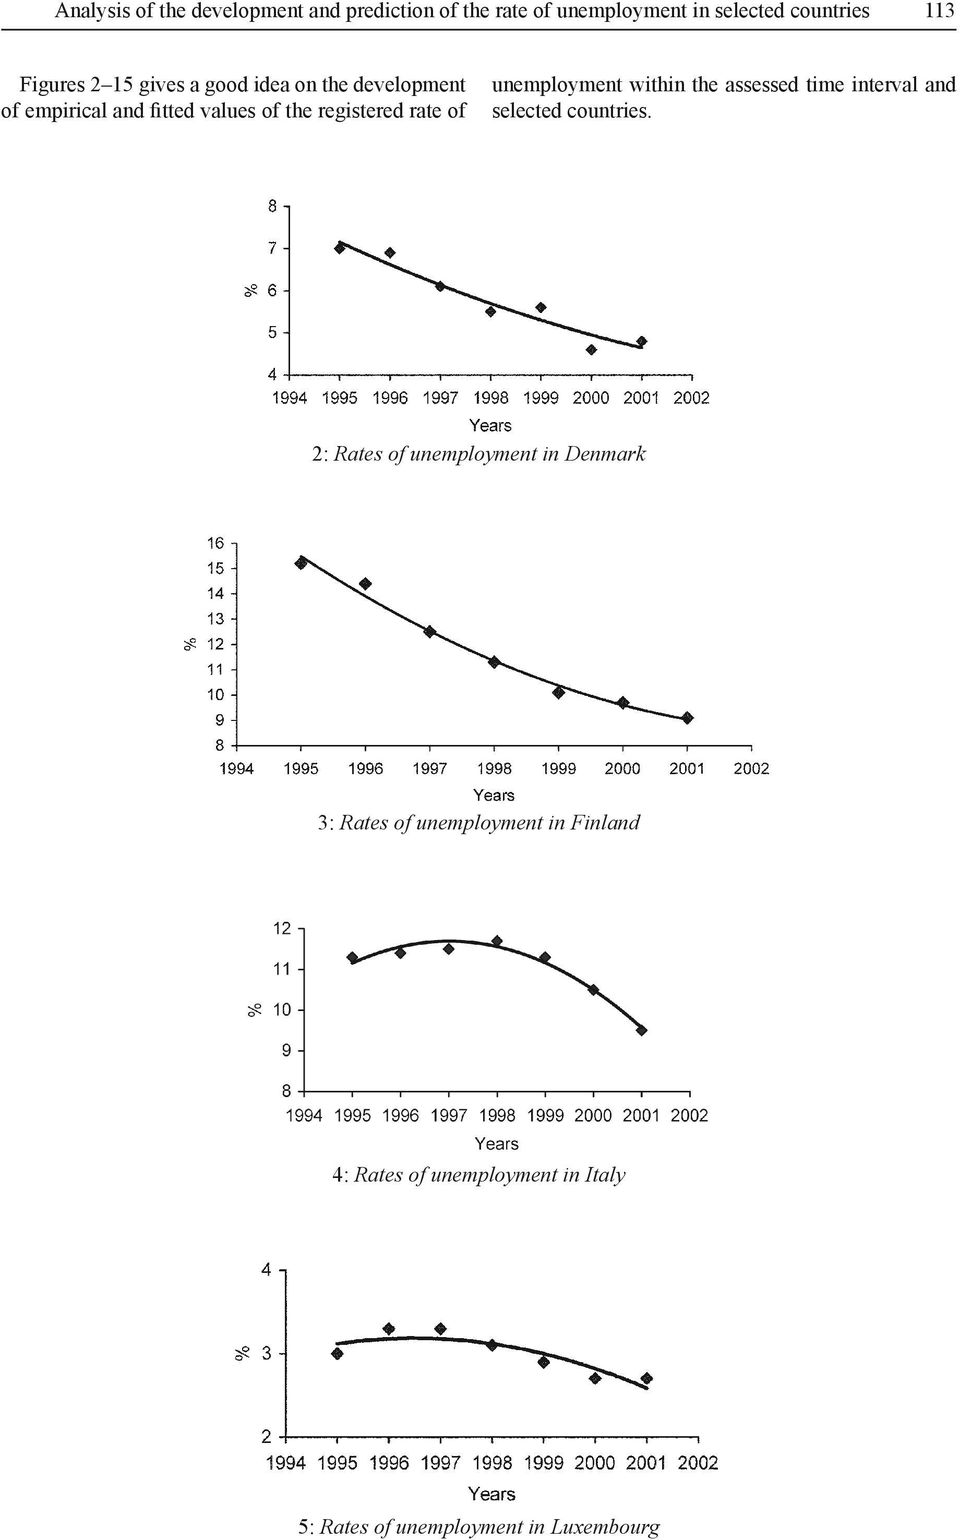 unemployment within the assessed time interval and selected countries.